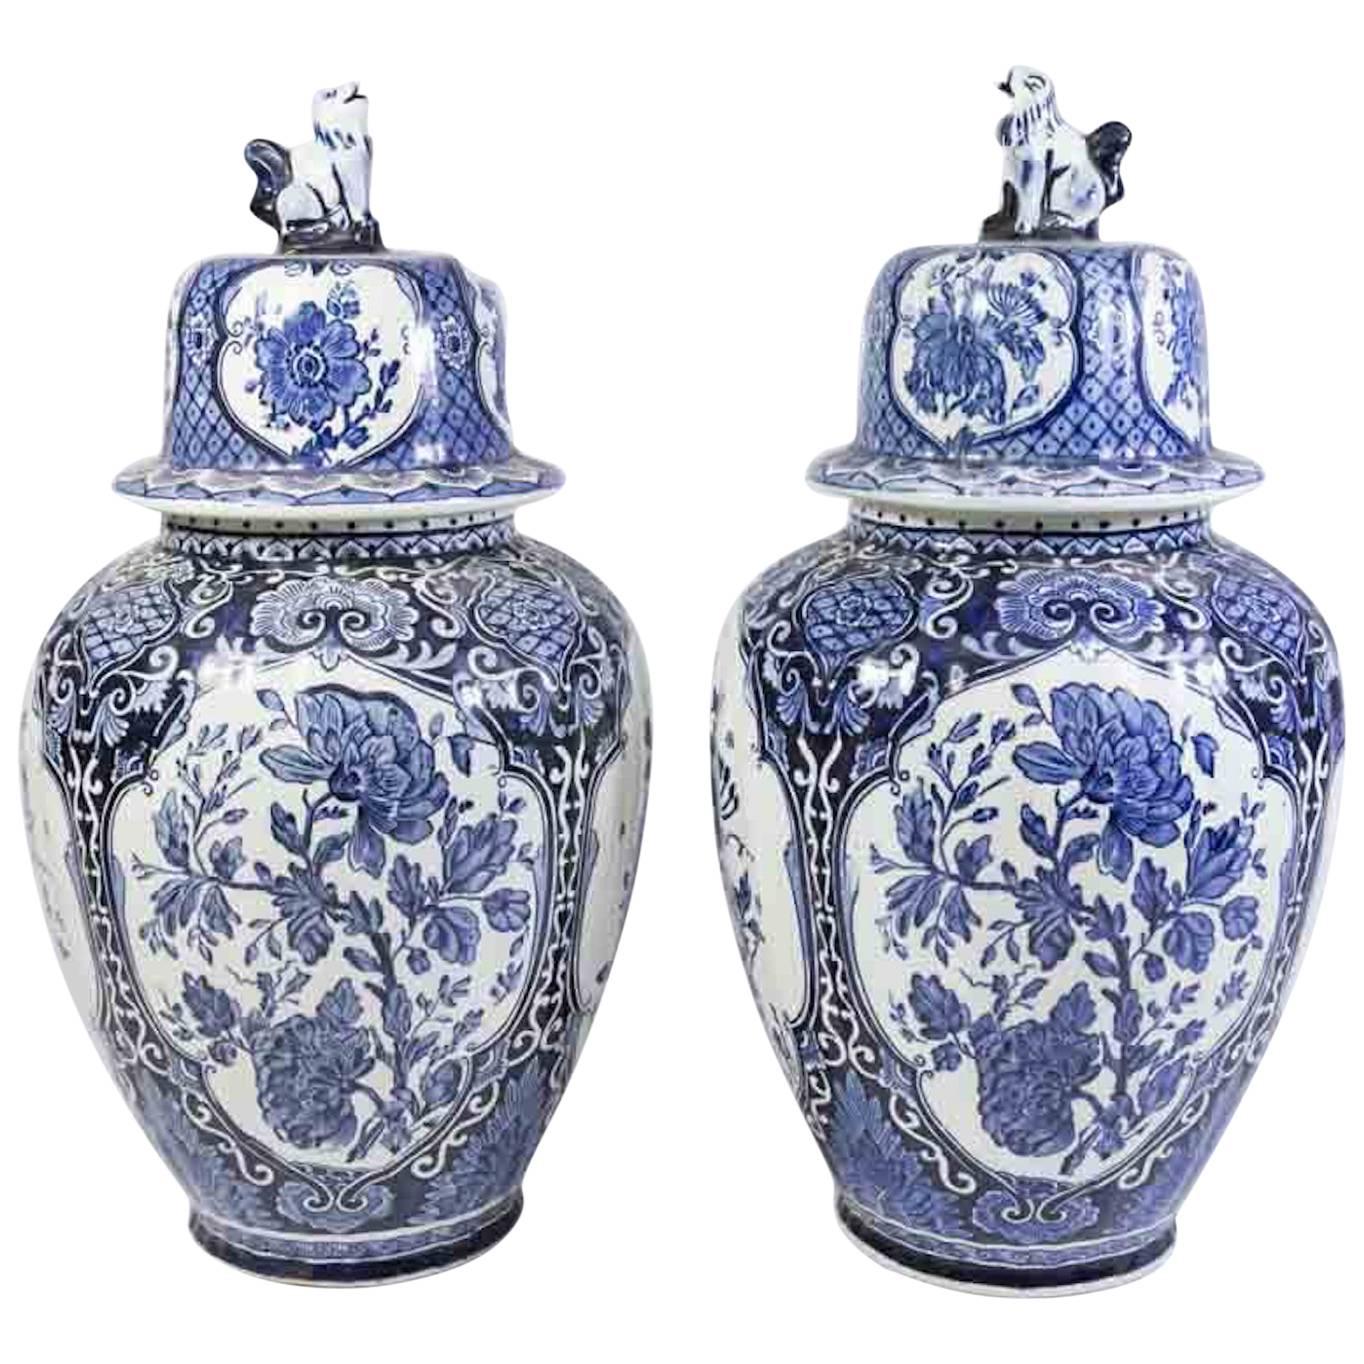 Pair of Delft Style Ginger Jars